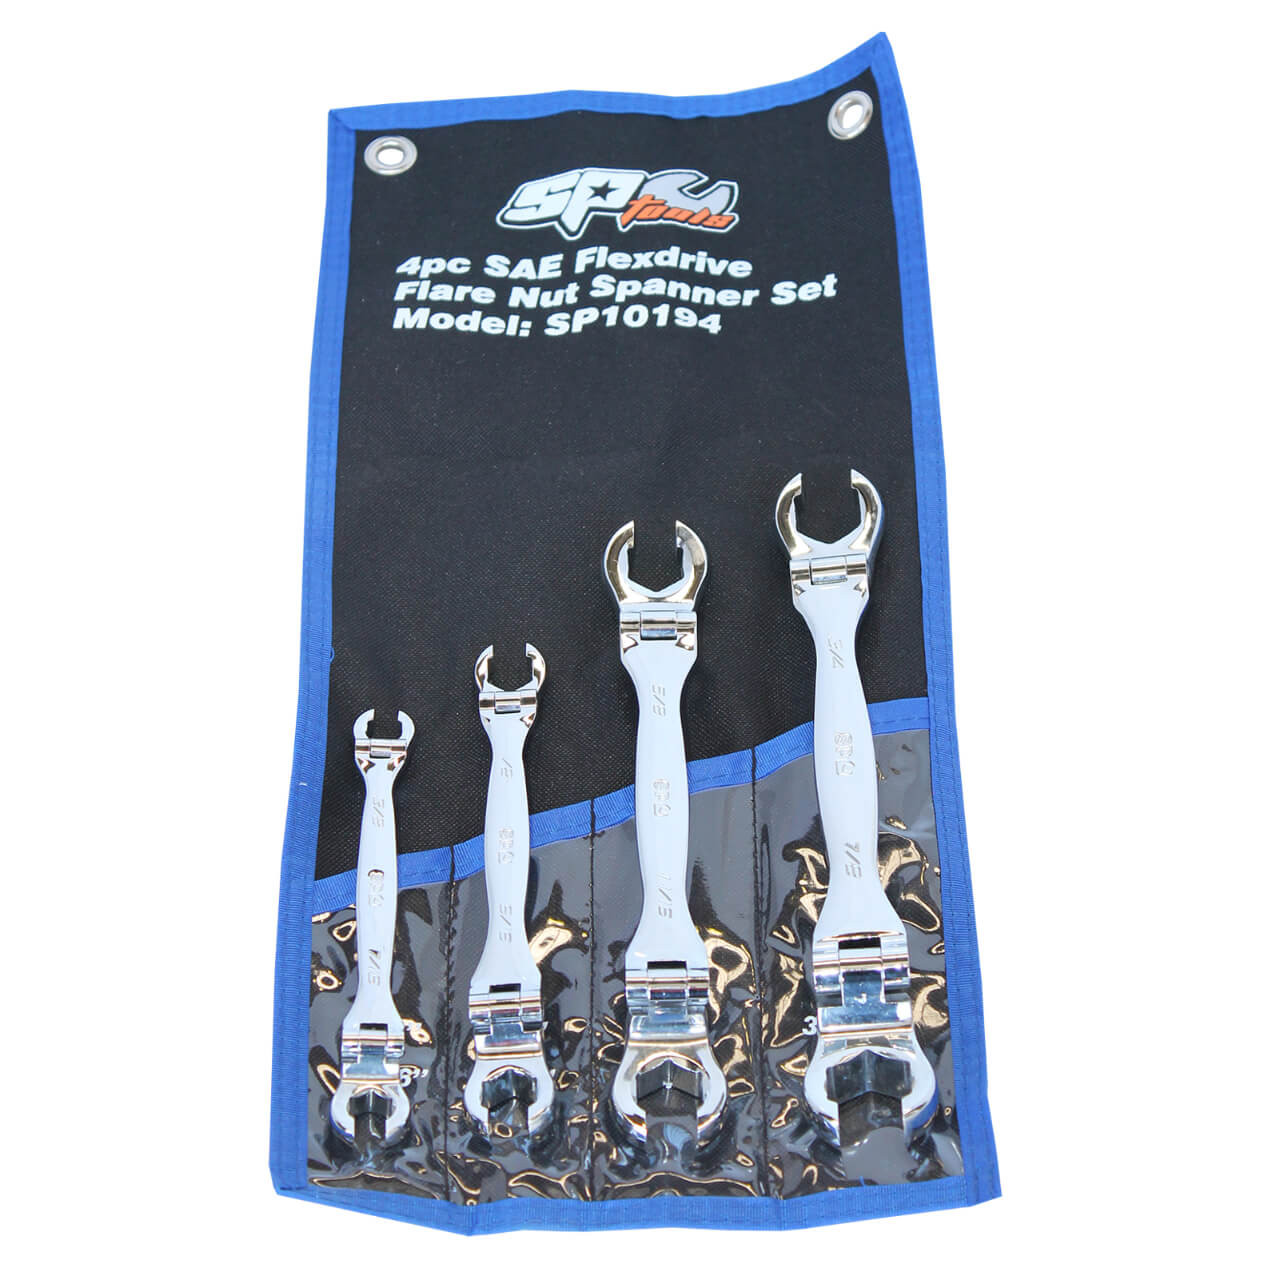 SP Tools 3/8-7/8 Flex Head Flare Nut Spanner Set Imperial 4pce